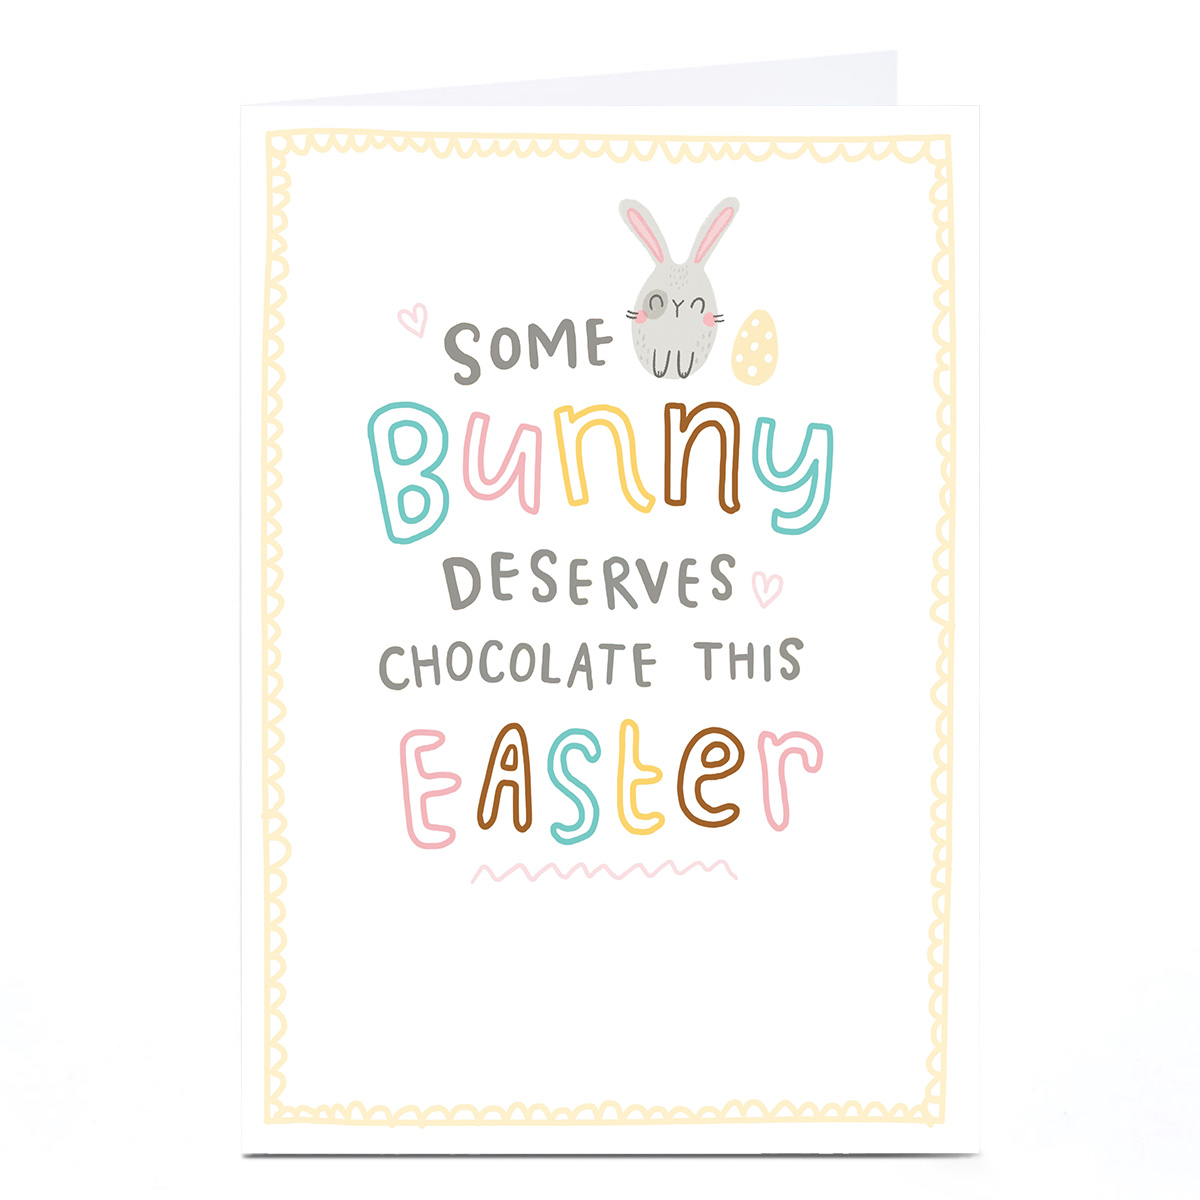 Personalised Blue Kiwi Easter Card - Some Bunny Deserves Chocolate